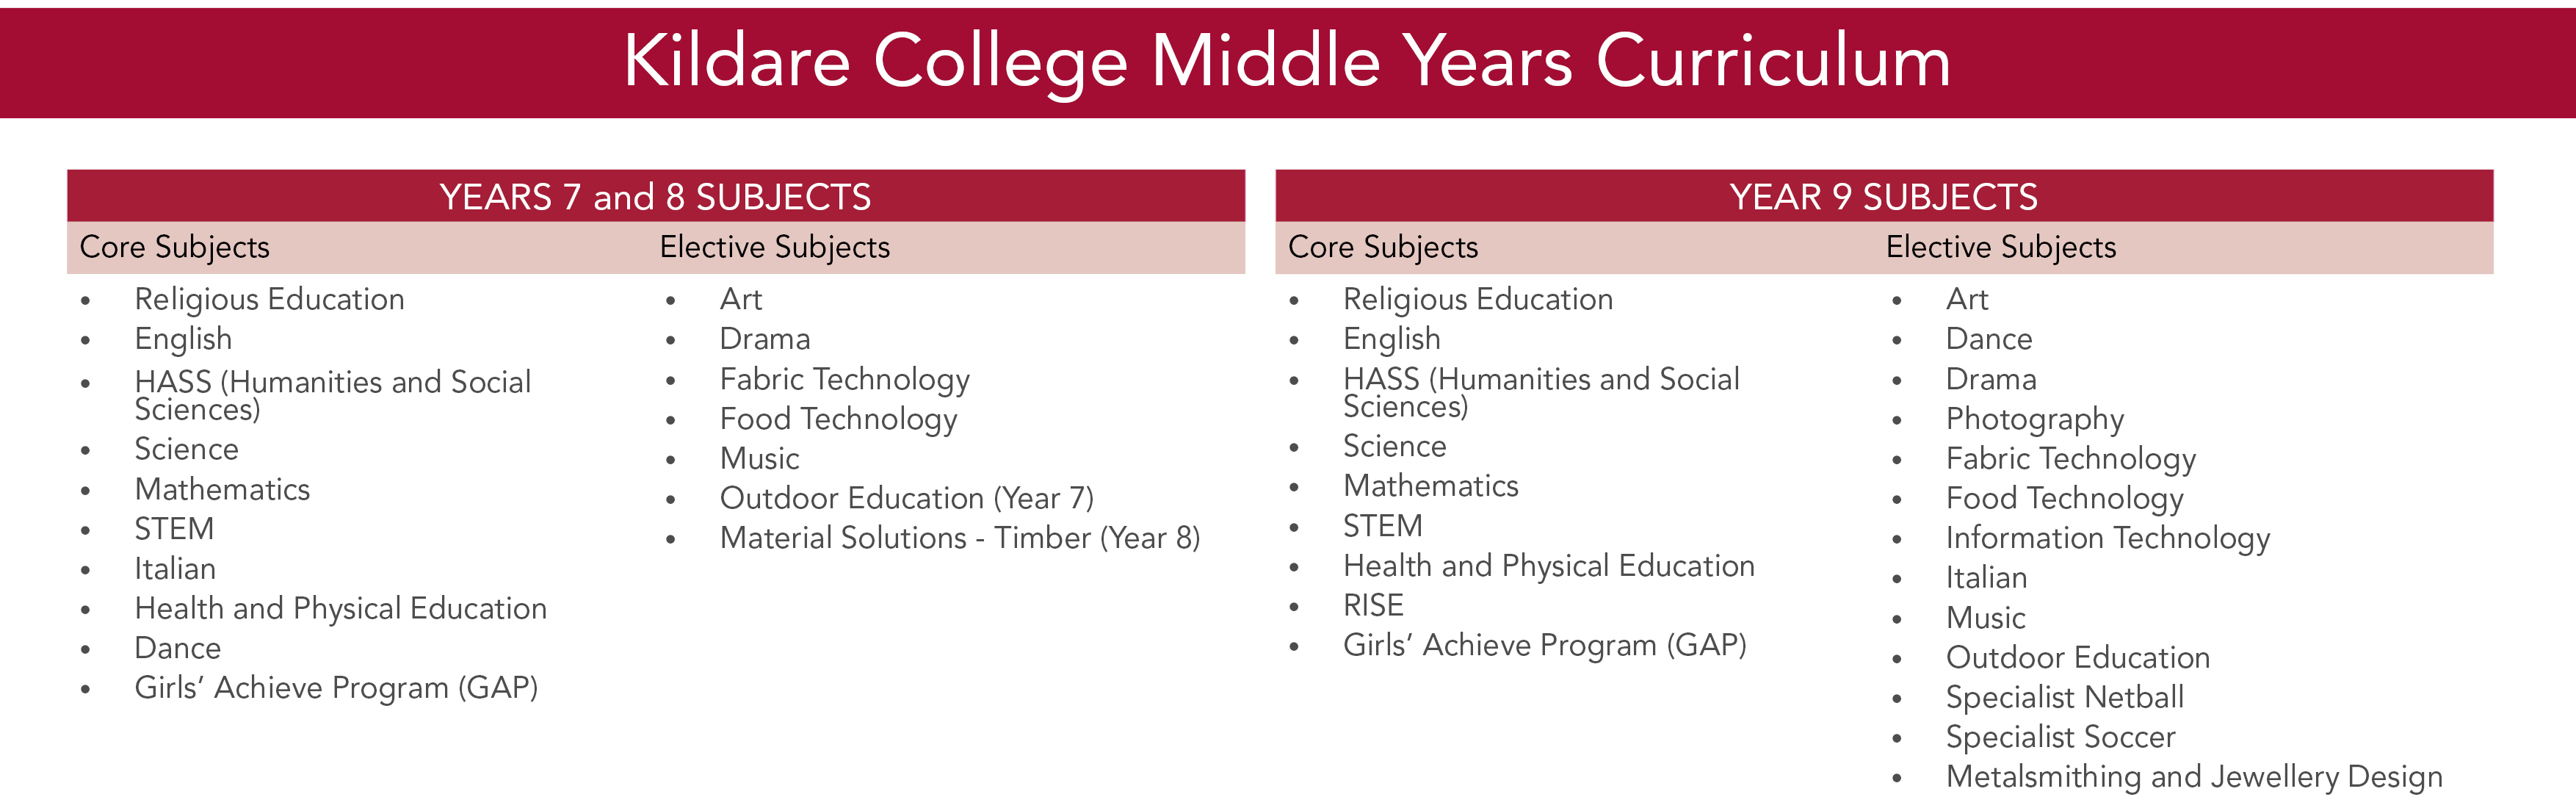 Middle Years Curriculum